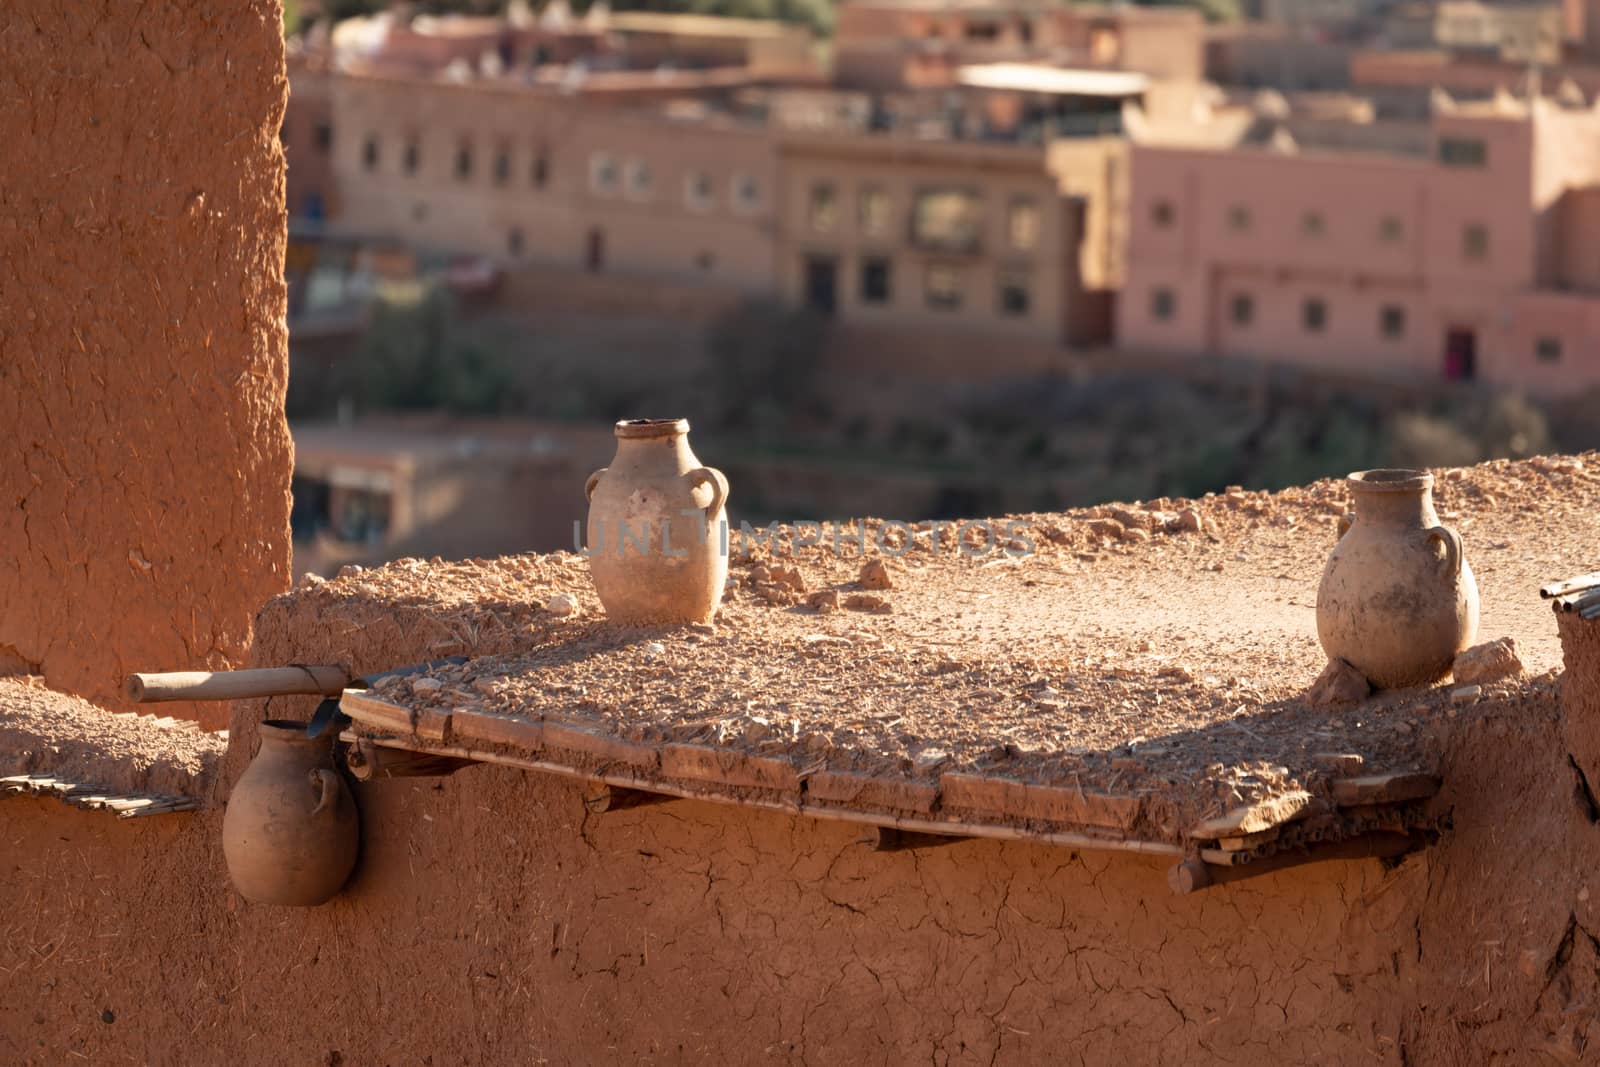 Ait Ben Haddou ksar Morocco, ancient fortress that is a Unesco Heritage site. Beautiful late afternoon light with honey, gold coloured mud brick construction the kasbah, or fortified town dates from 11th cent. and is on the former caravan route from the Sahara and Marrakech. The location has been used for many famous movies. High quality photo